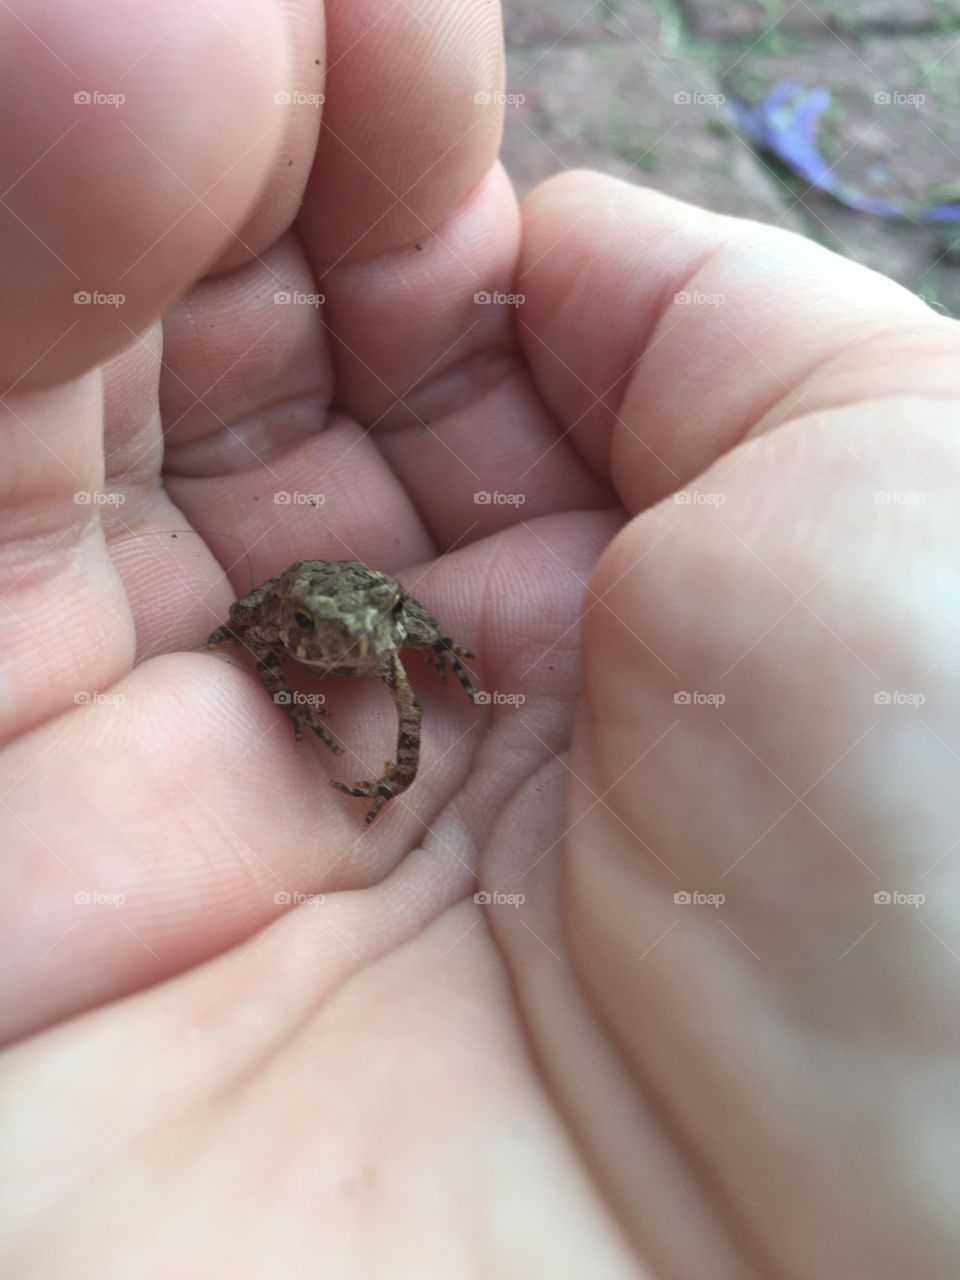 Teeny-tiny little frog in my hand. 